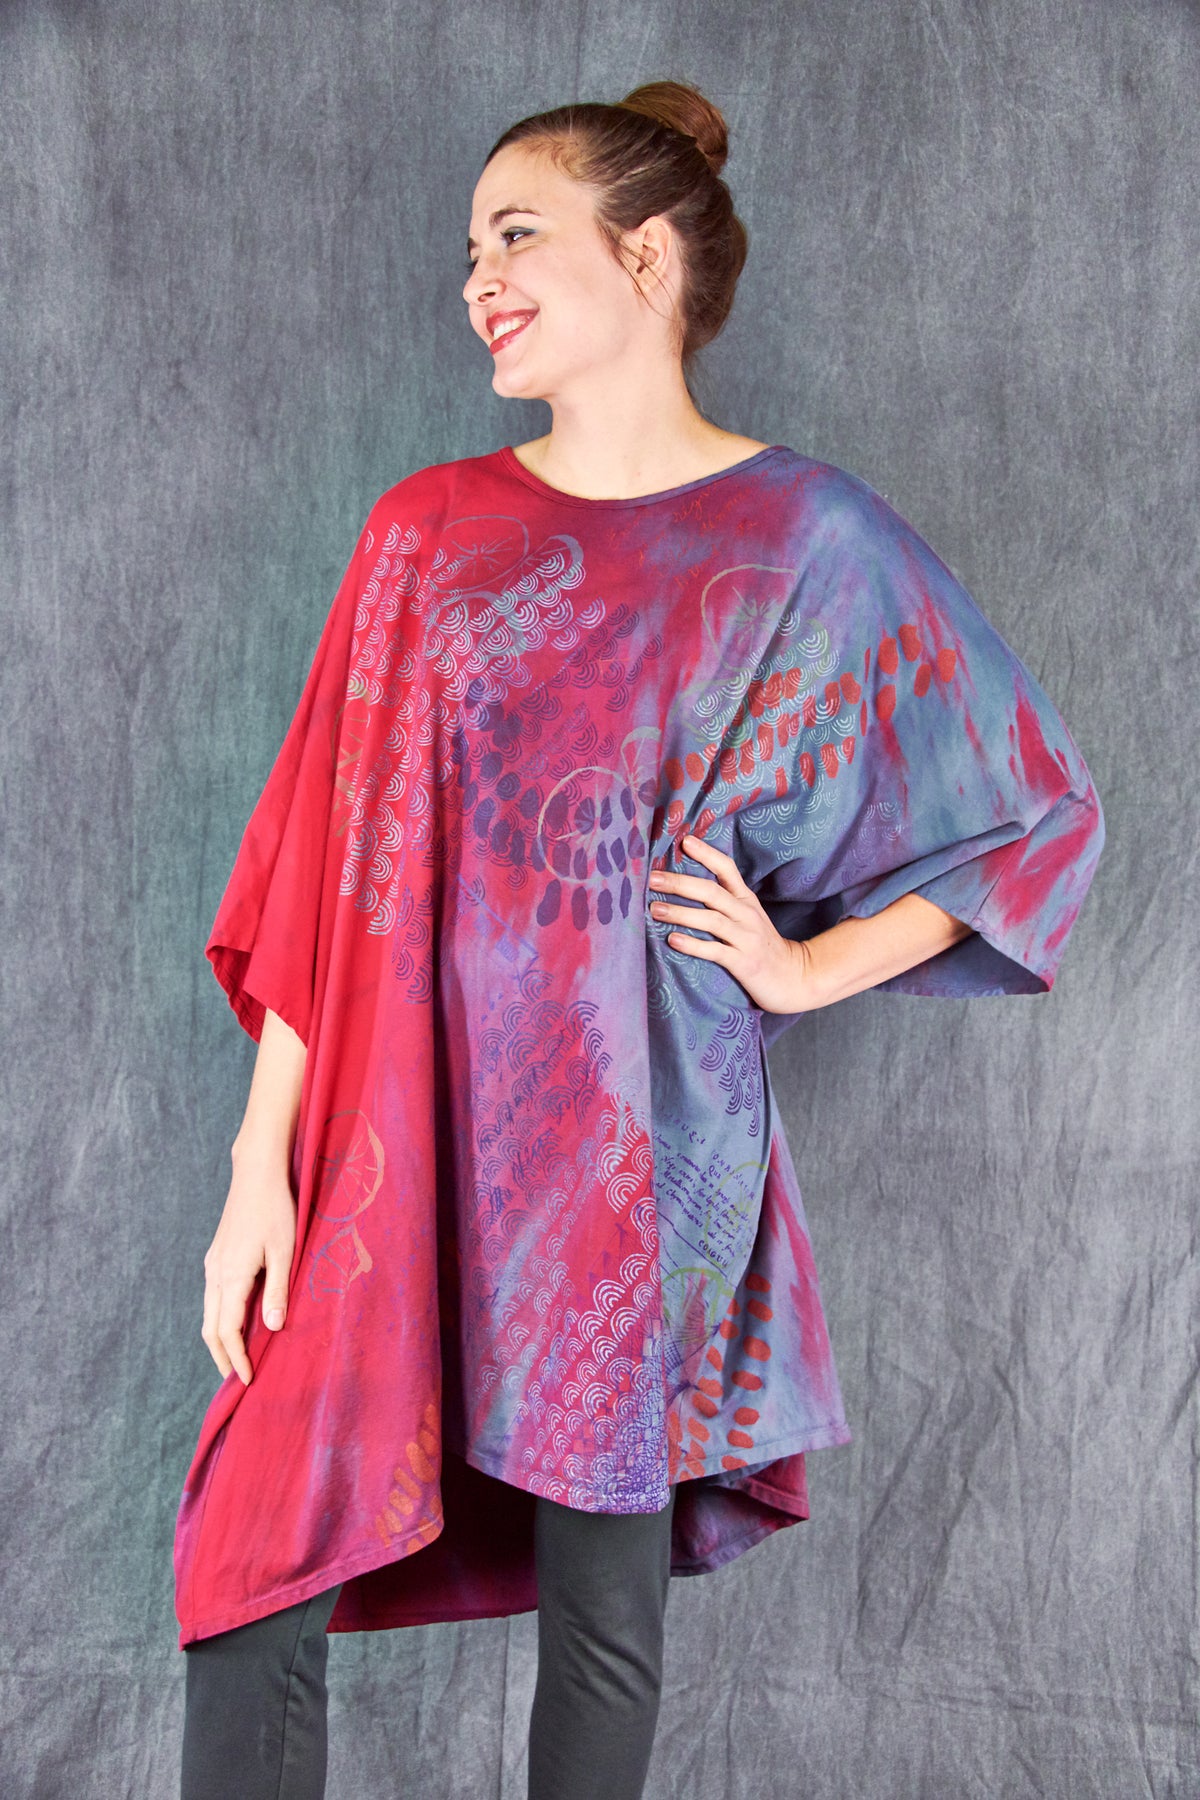 1255HD Oversize Tunic Tee Bright Scarlet Storm Cloud-P